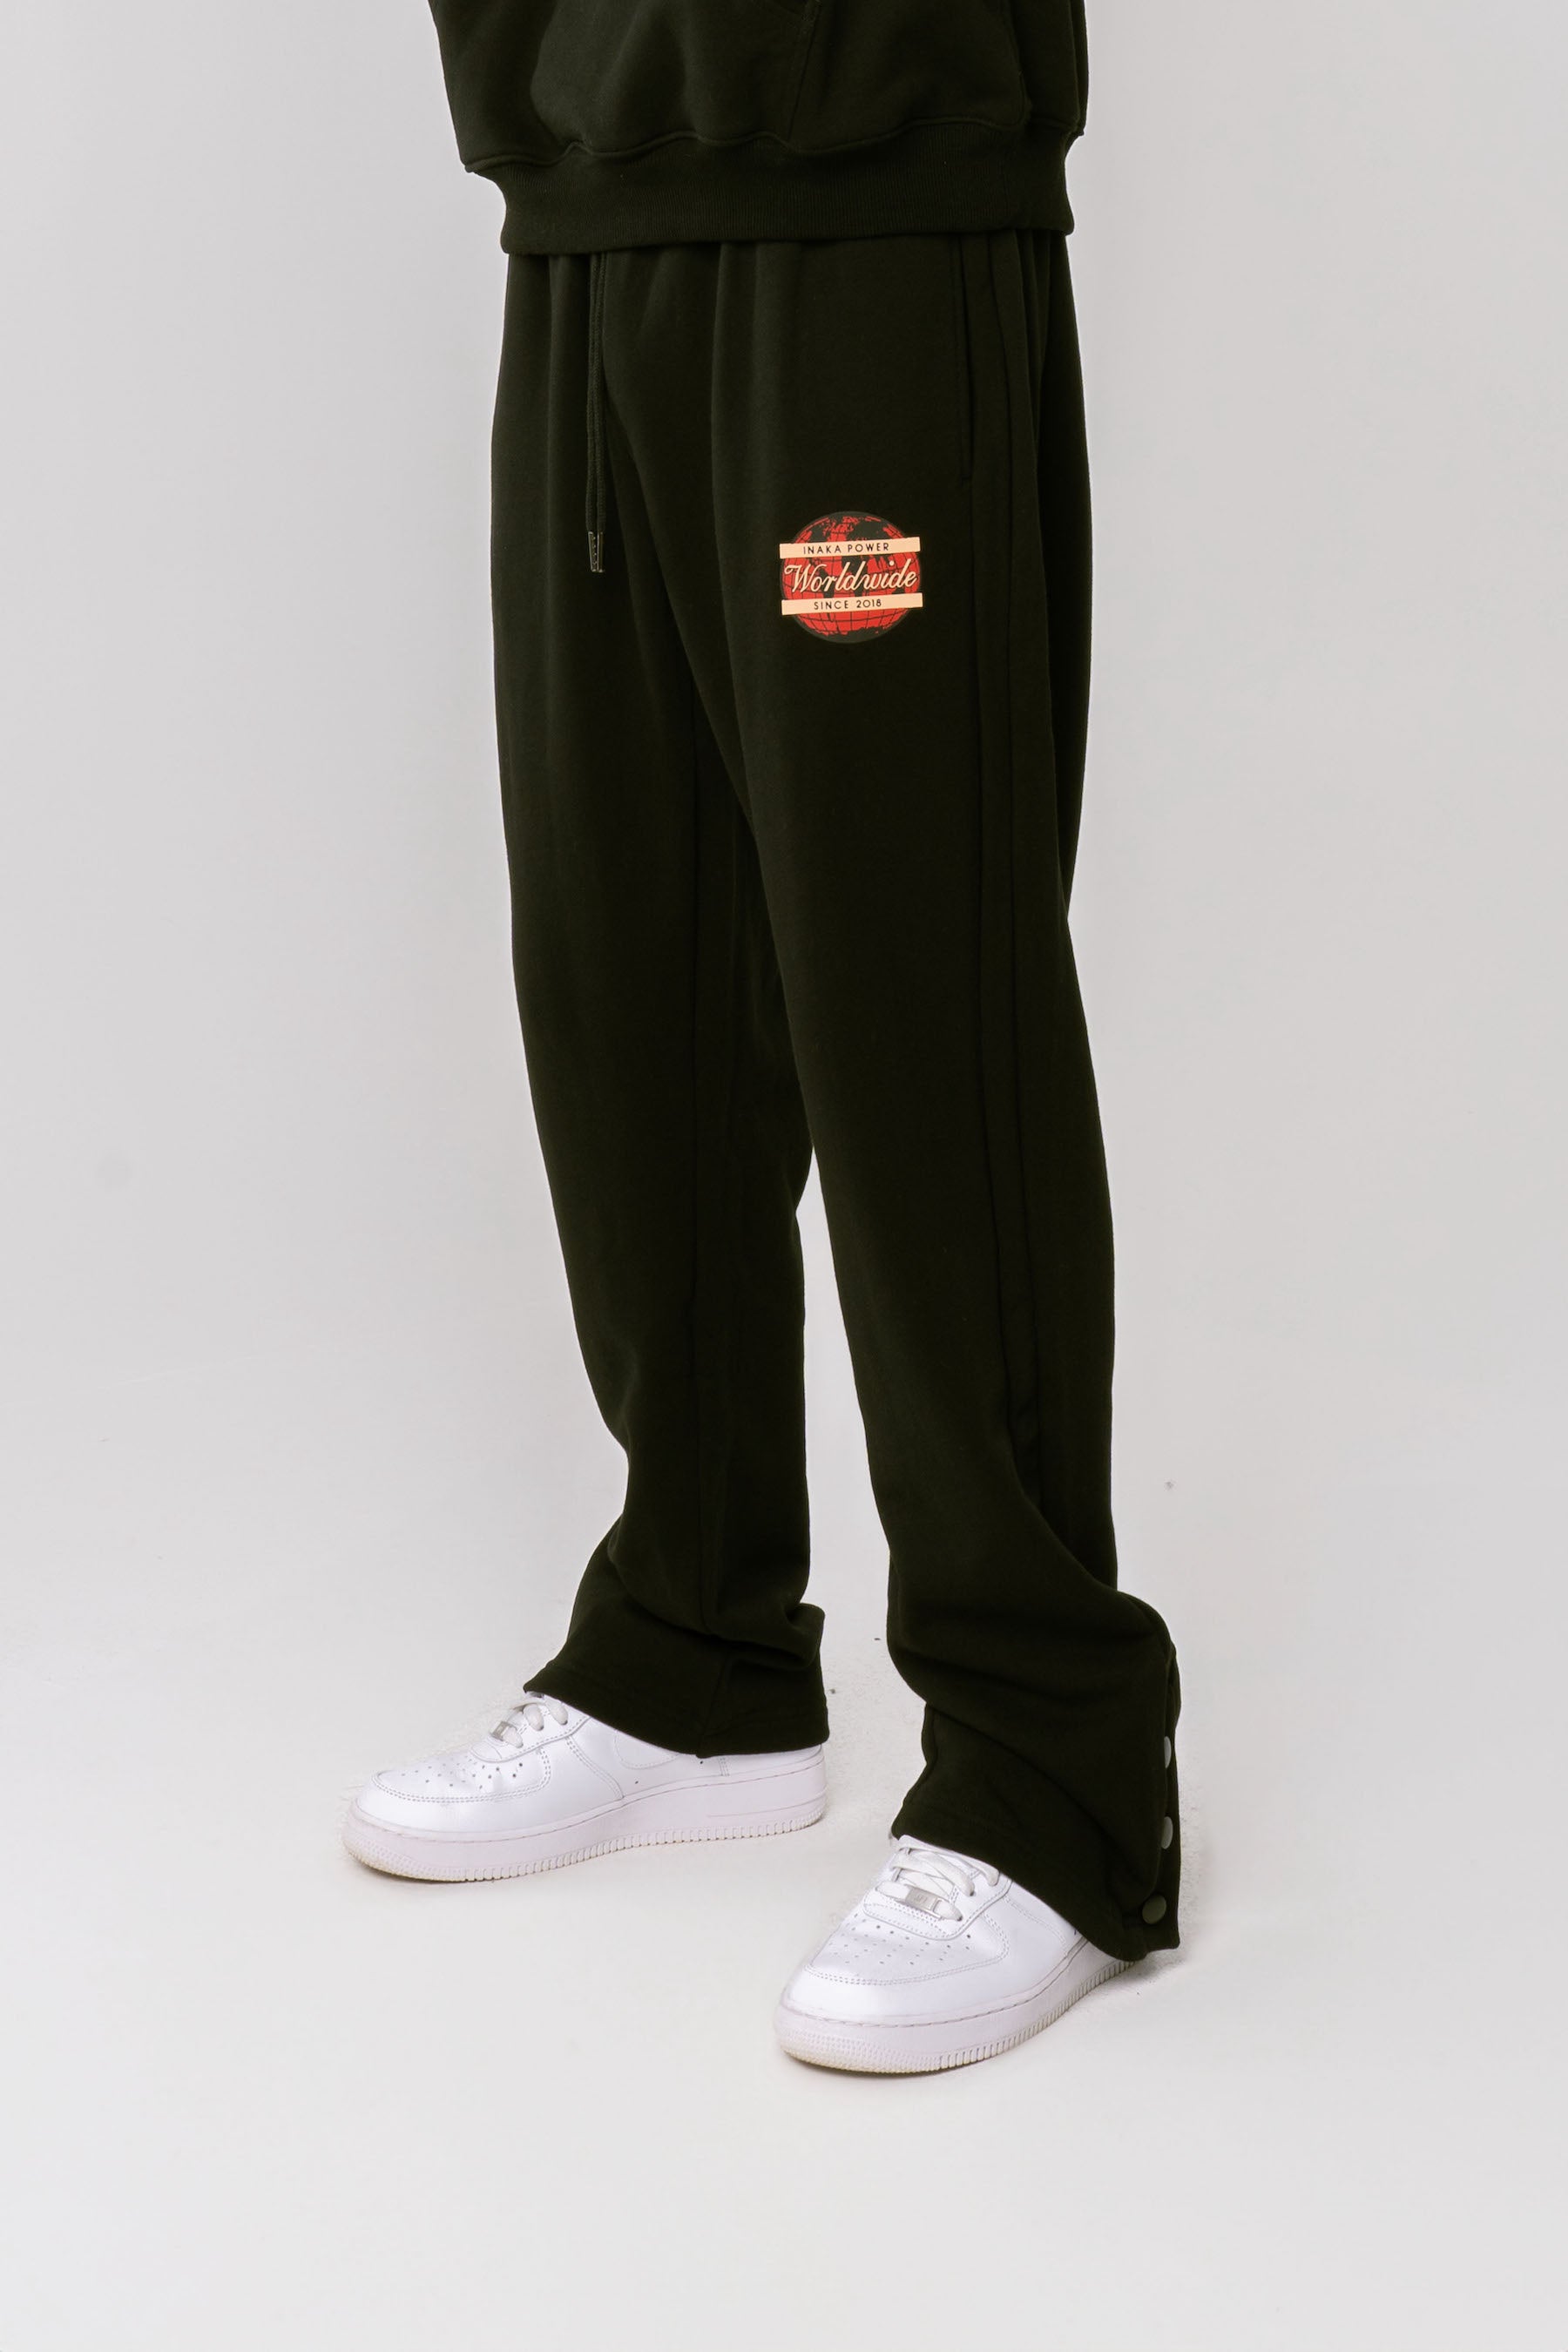 EST. Relaxed Sweats - Midnight